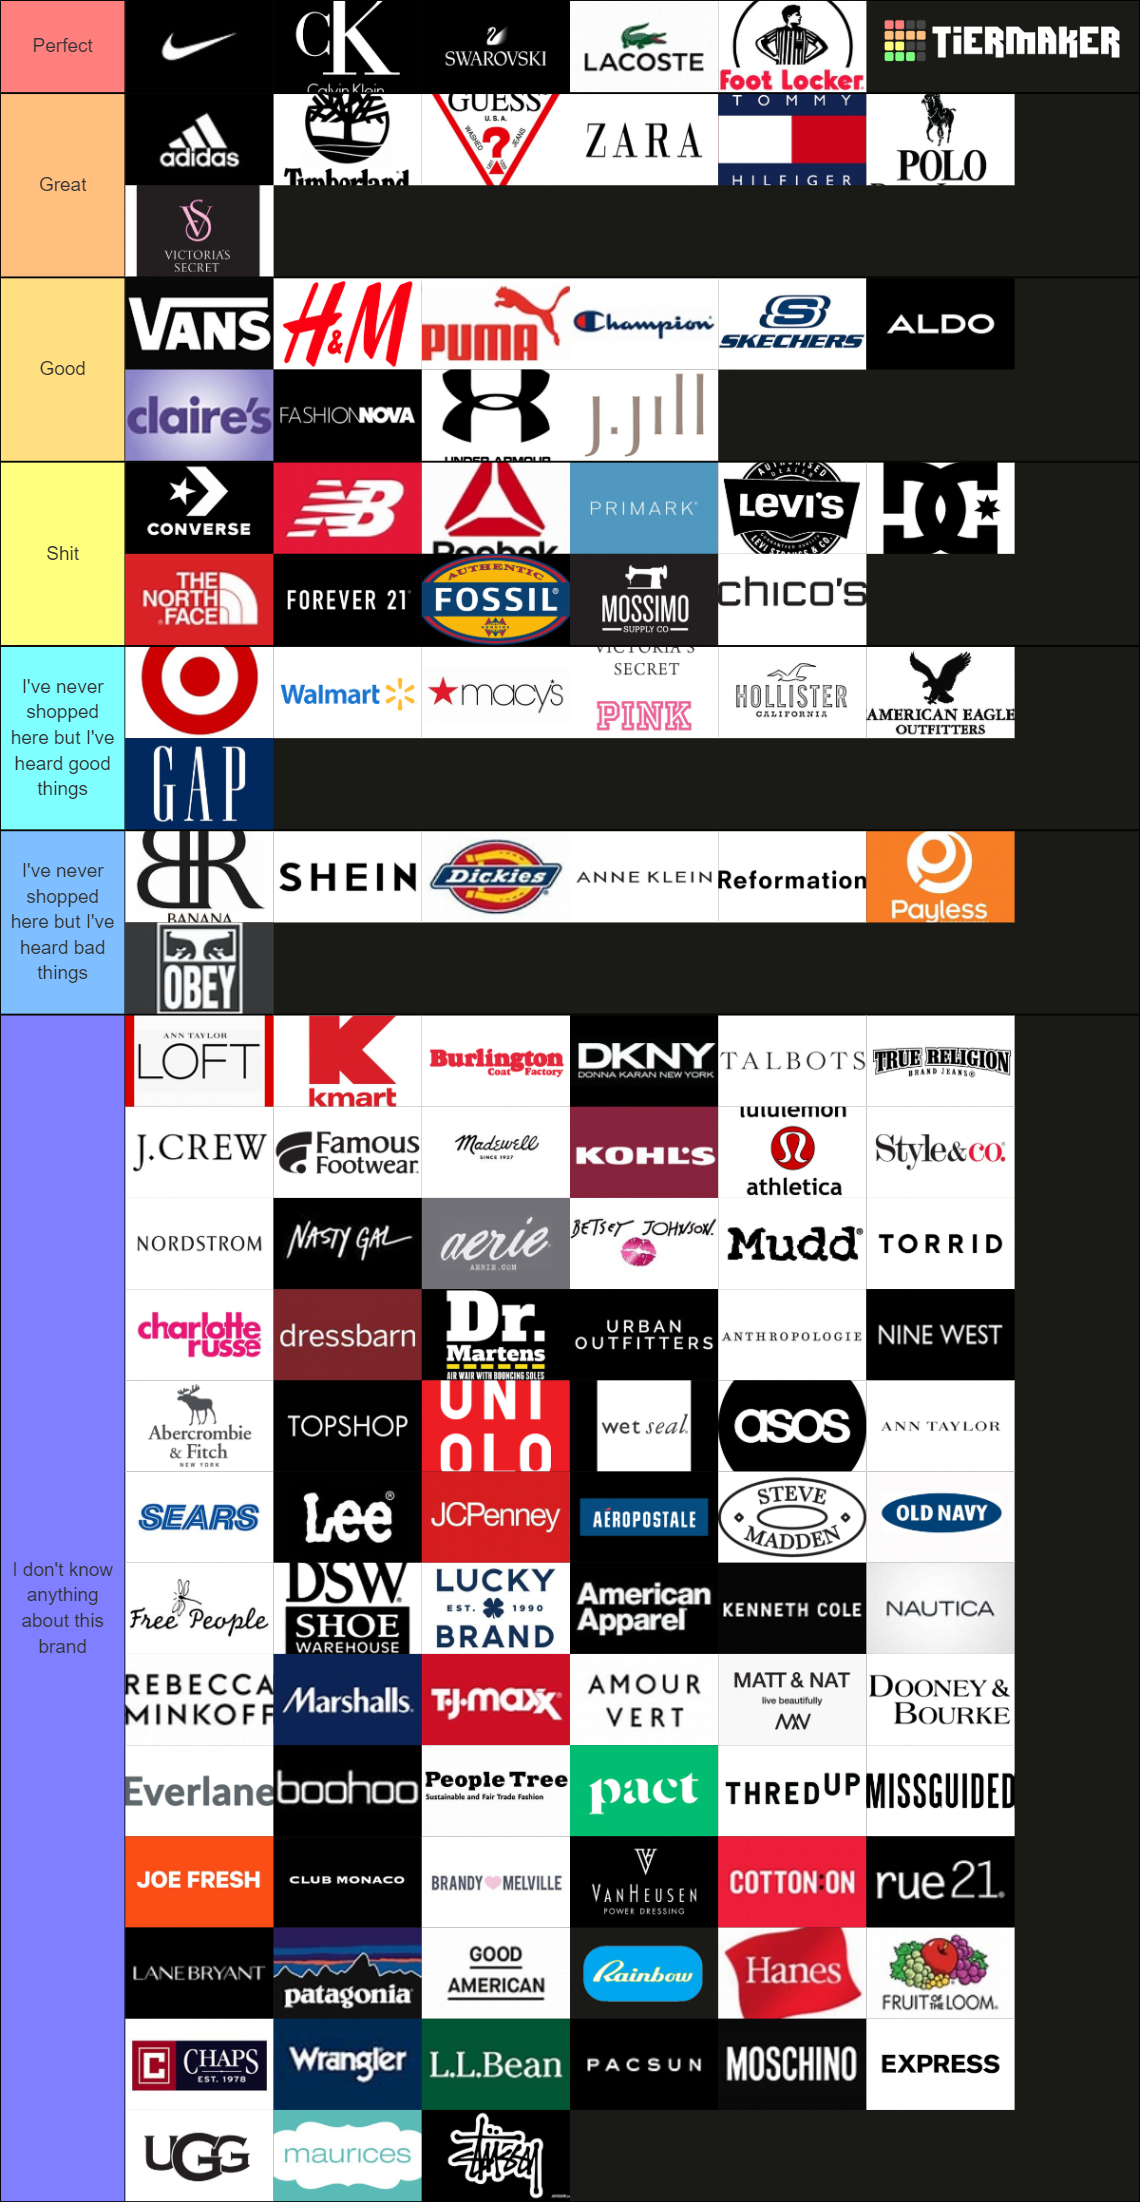 100+ Clothing Brands, Labels, Retailers Tier List Rankings